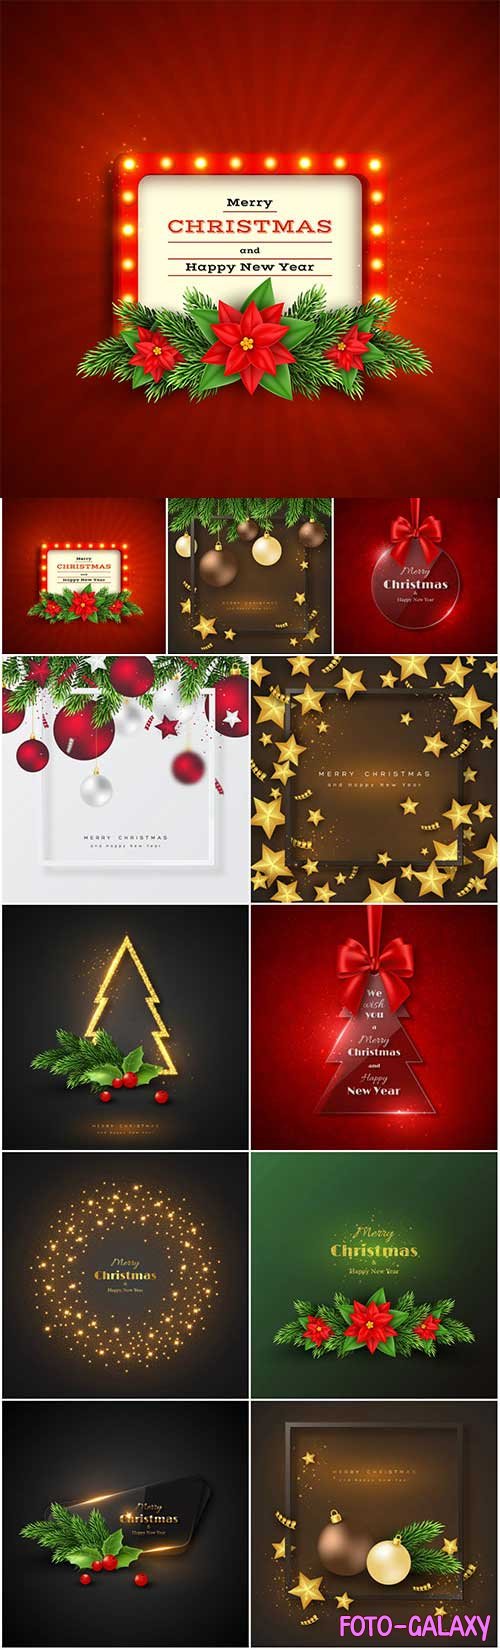 New Year and Christmas vector vol 3